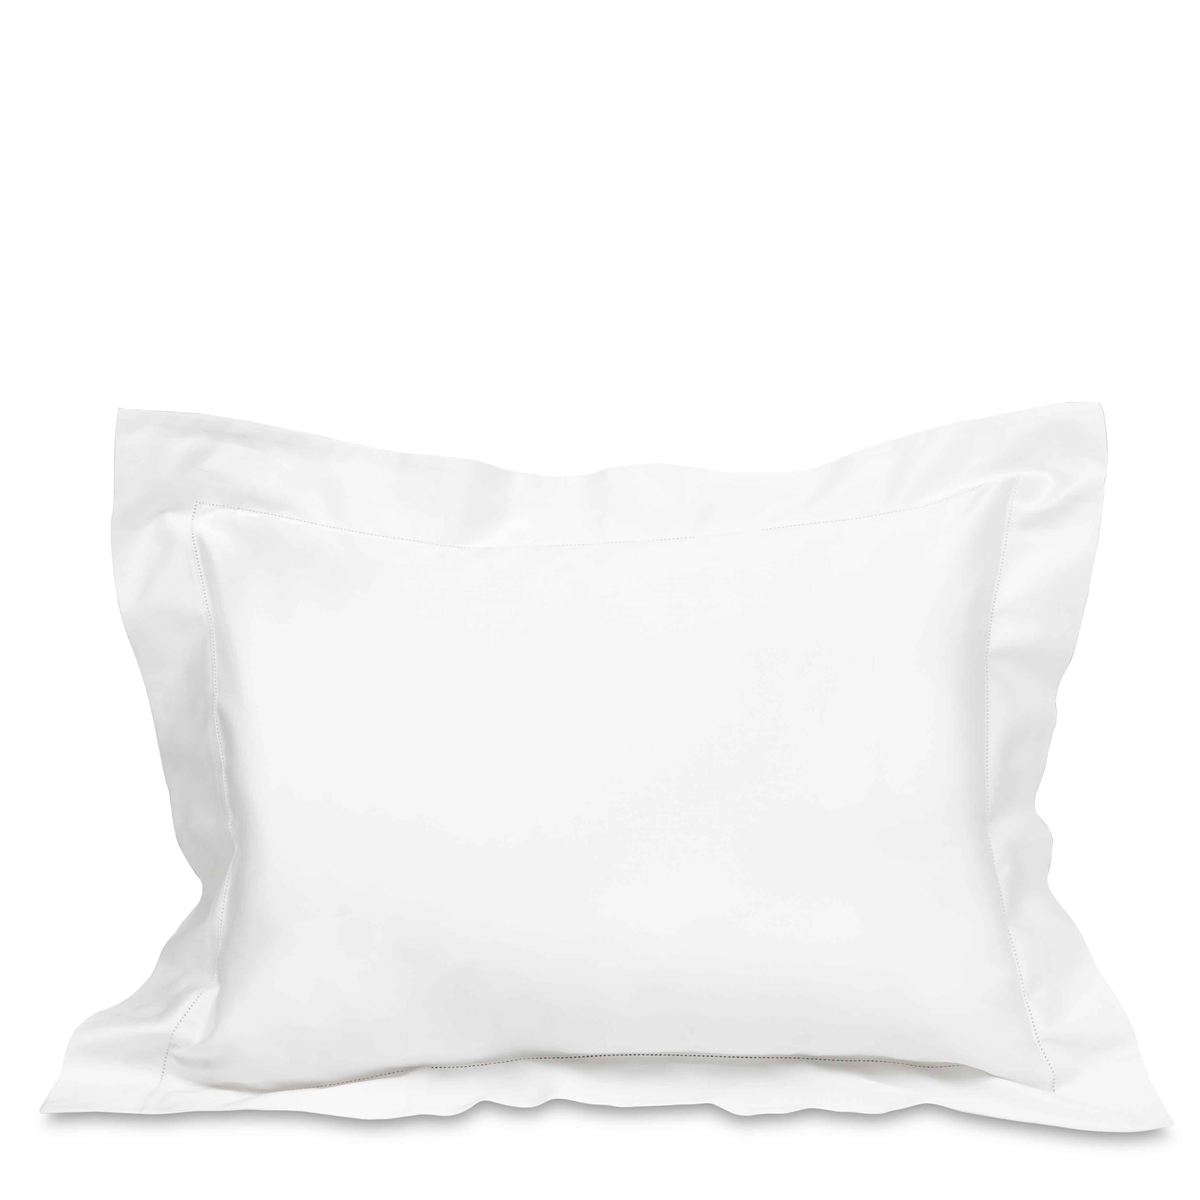 Front View of Signoria Nuvola Bedding Sham in White Color